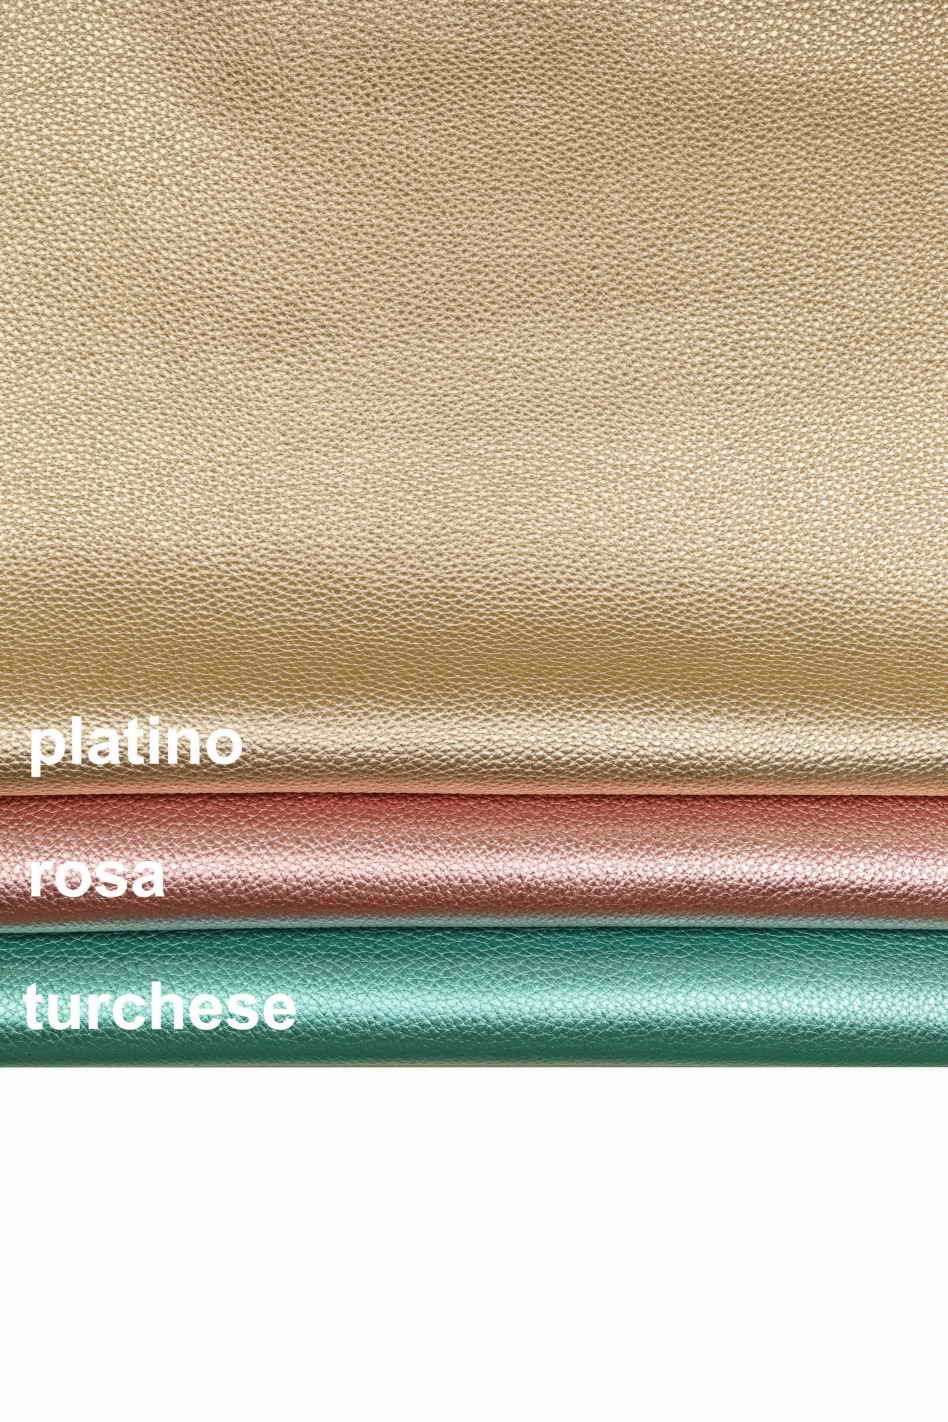 ROSE GOLD metallic leather hides sheep wrinkled lamb shiny sheepskin soft  distressed genuine leather for crafting